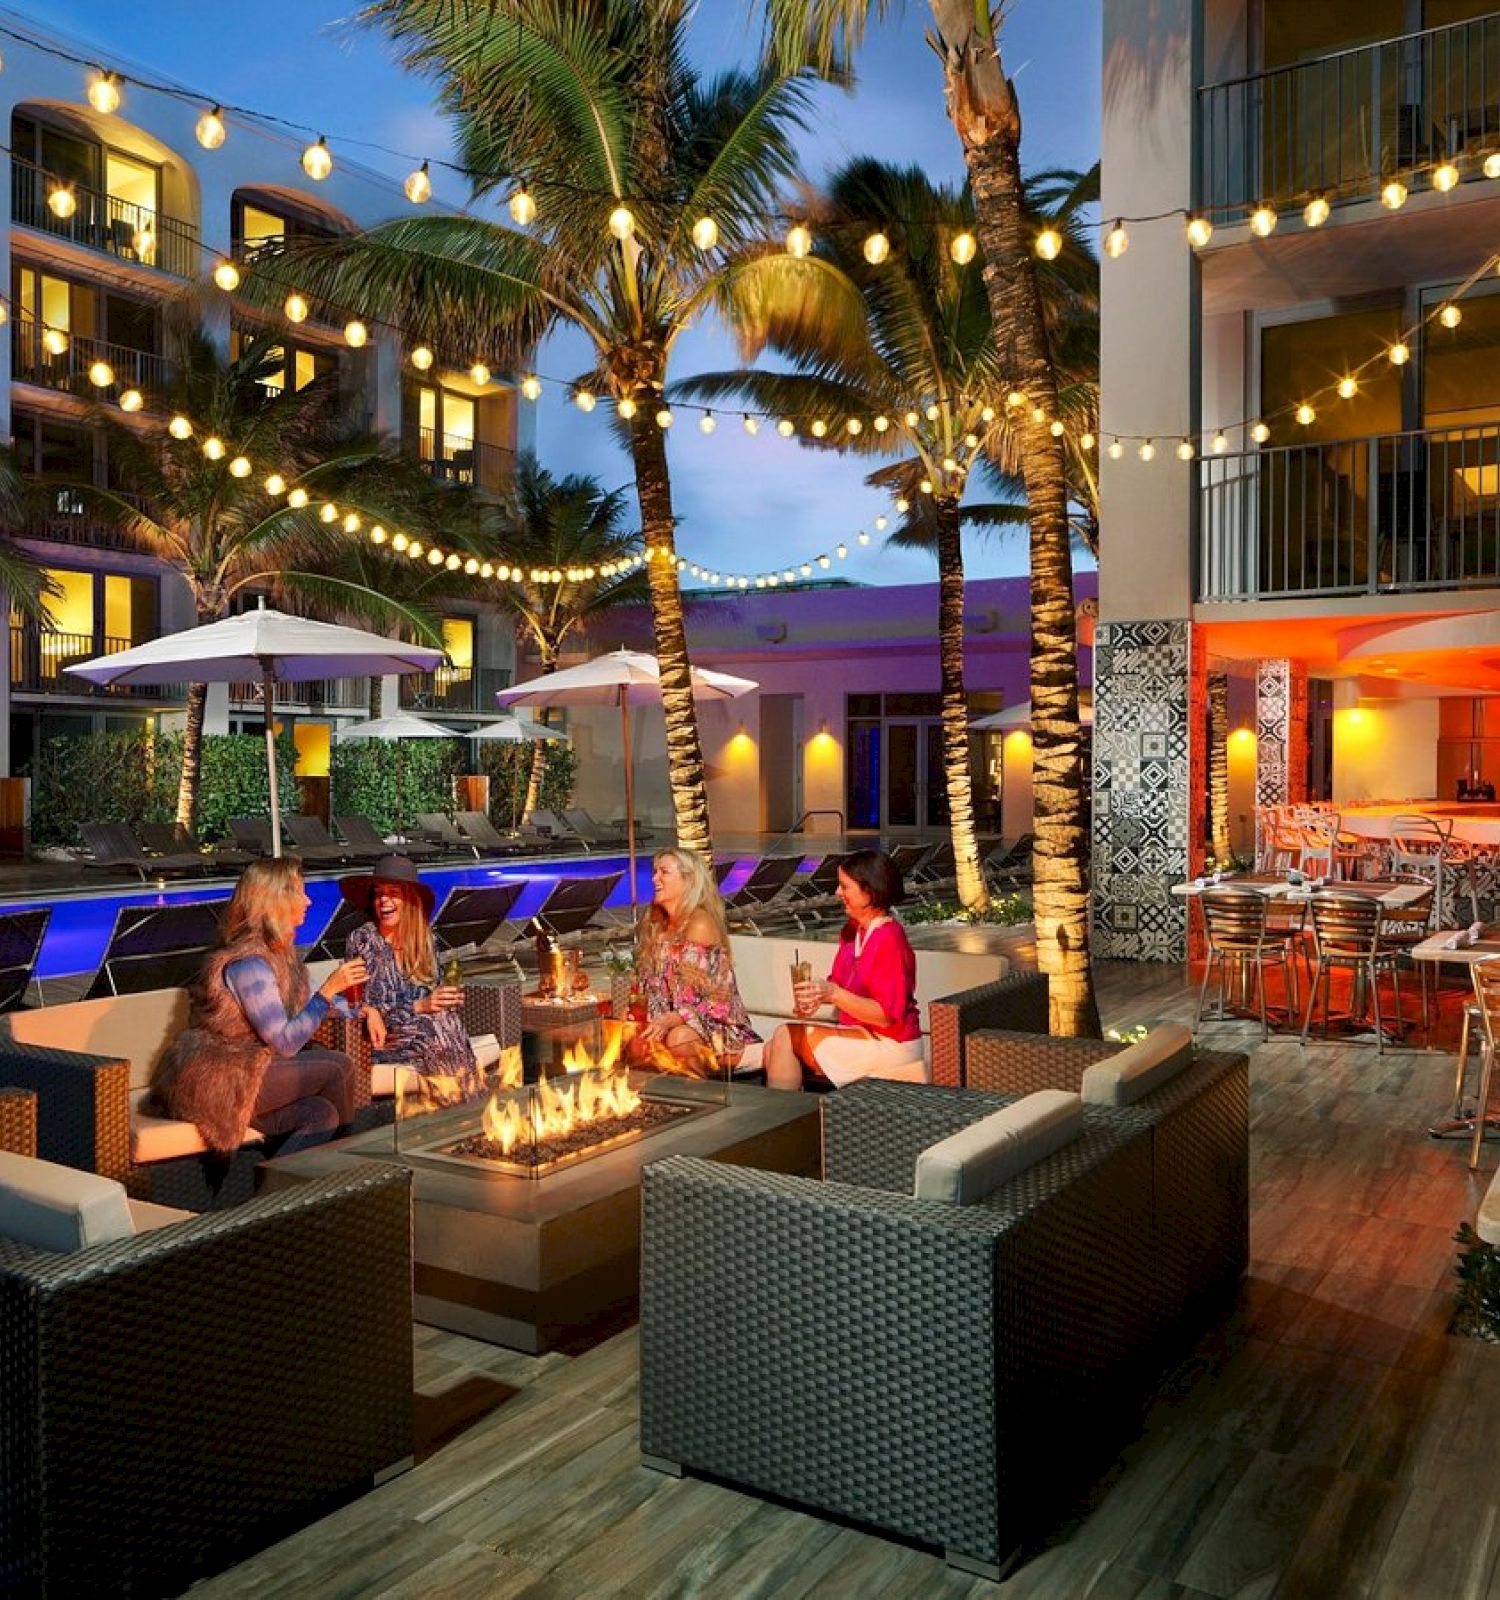 People are gathered around a fire pit in an outdoor lounge area of a resort, with string lights, palm trees, and a pool in the background.